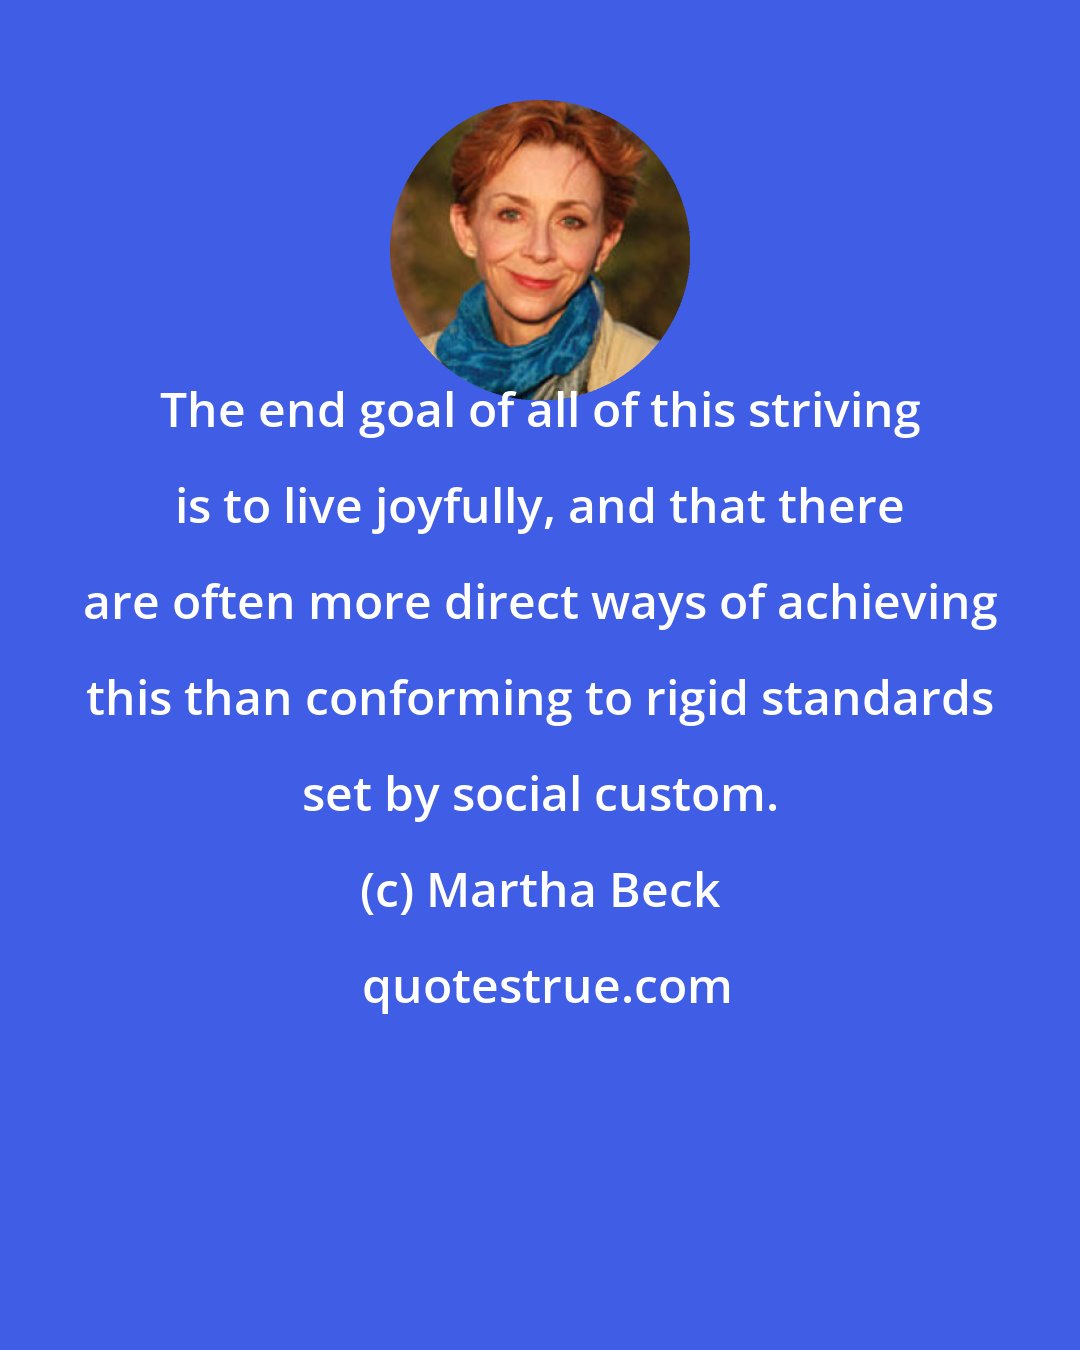 Martha Beck: The end goal of all of this striving is to live joyfully, and that there are often more direct ways of achieving this than conforming to rigid standards set by social custom.